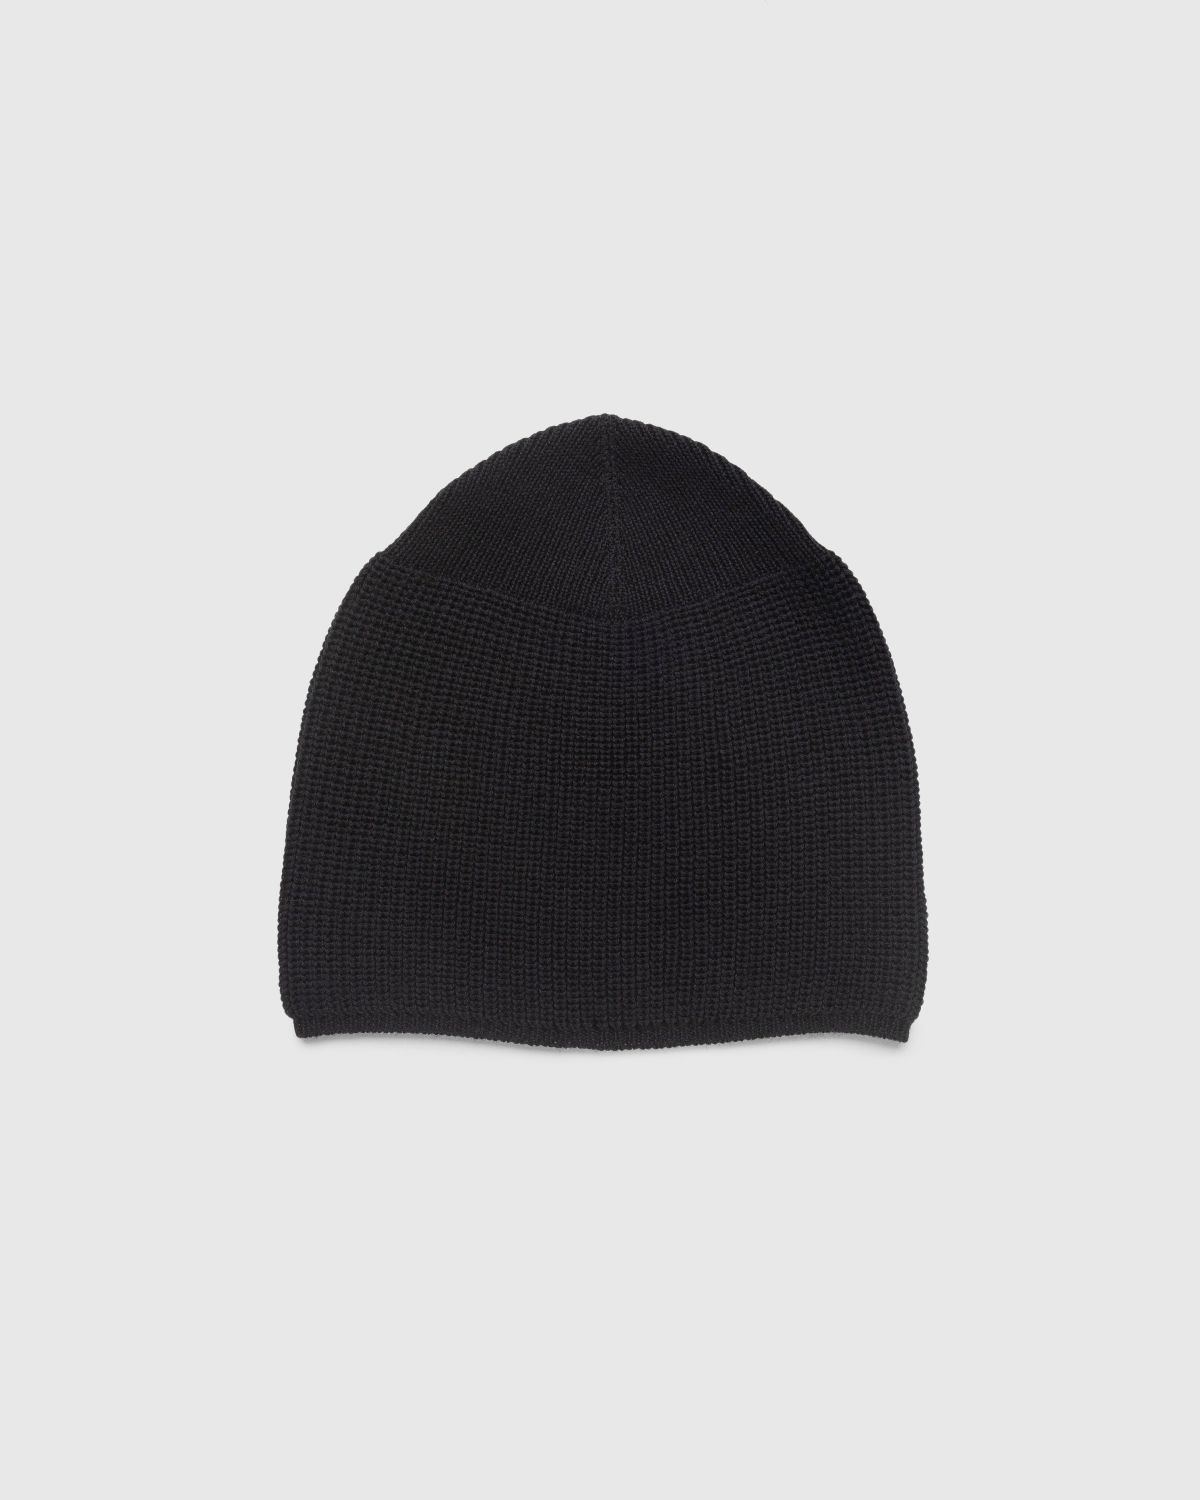 Our Legacy – Knit Beanie Black - Hats - Black - Image 1